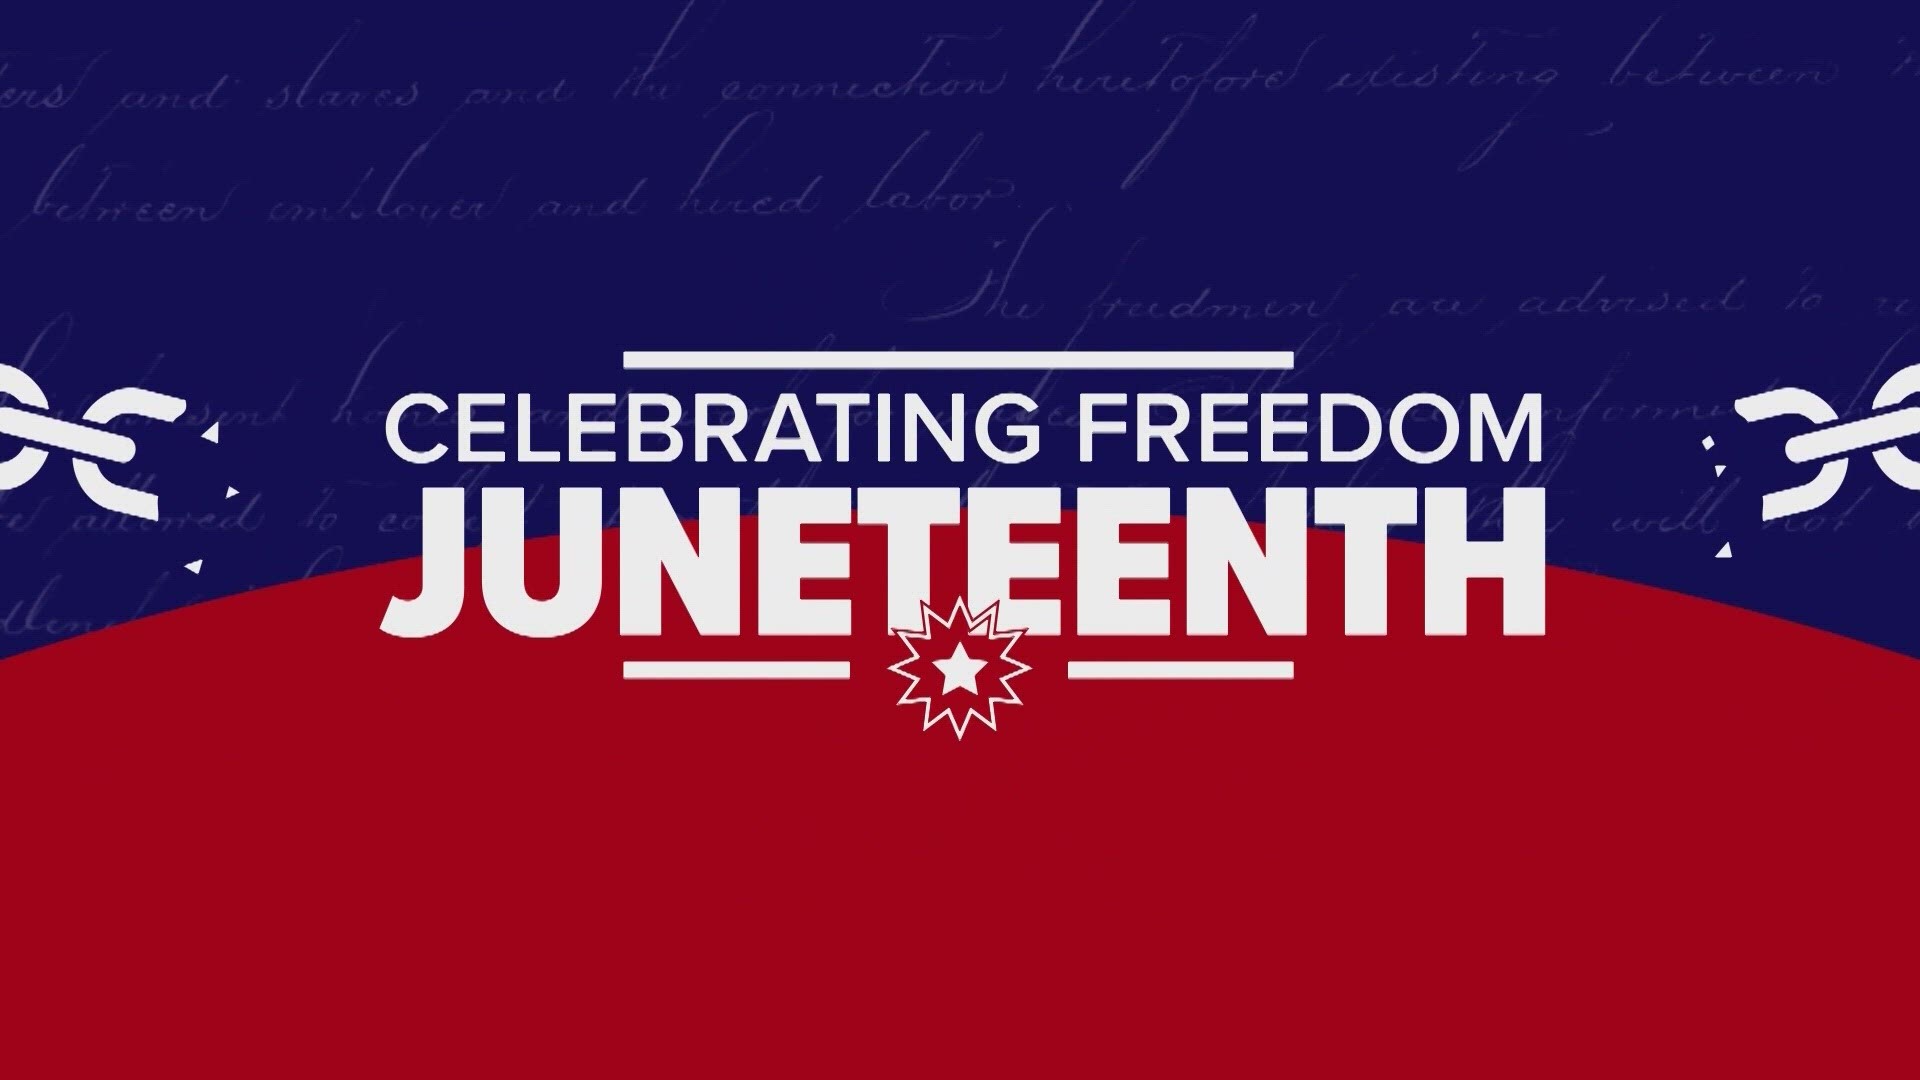 Sharing the history and significance of Juneteenth, as well as the different ways to celebrate and commemorate freedom.